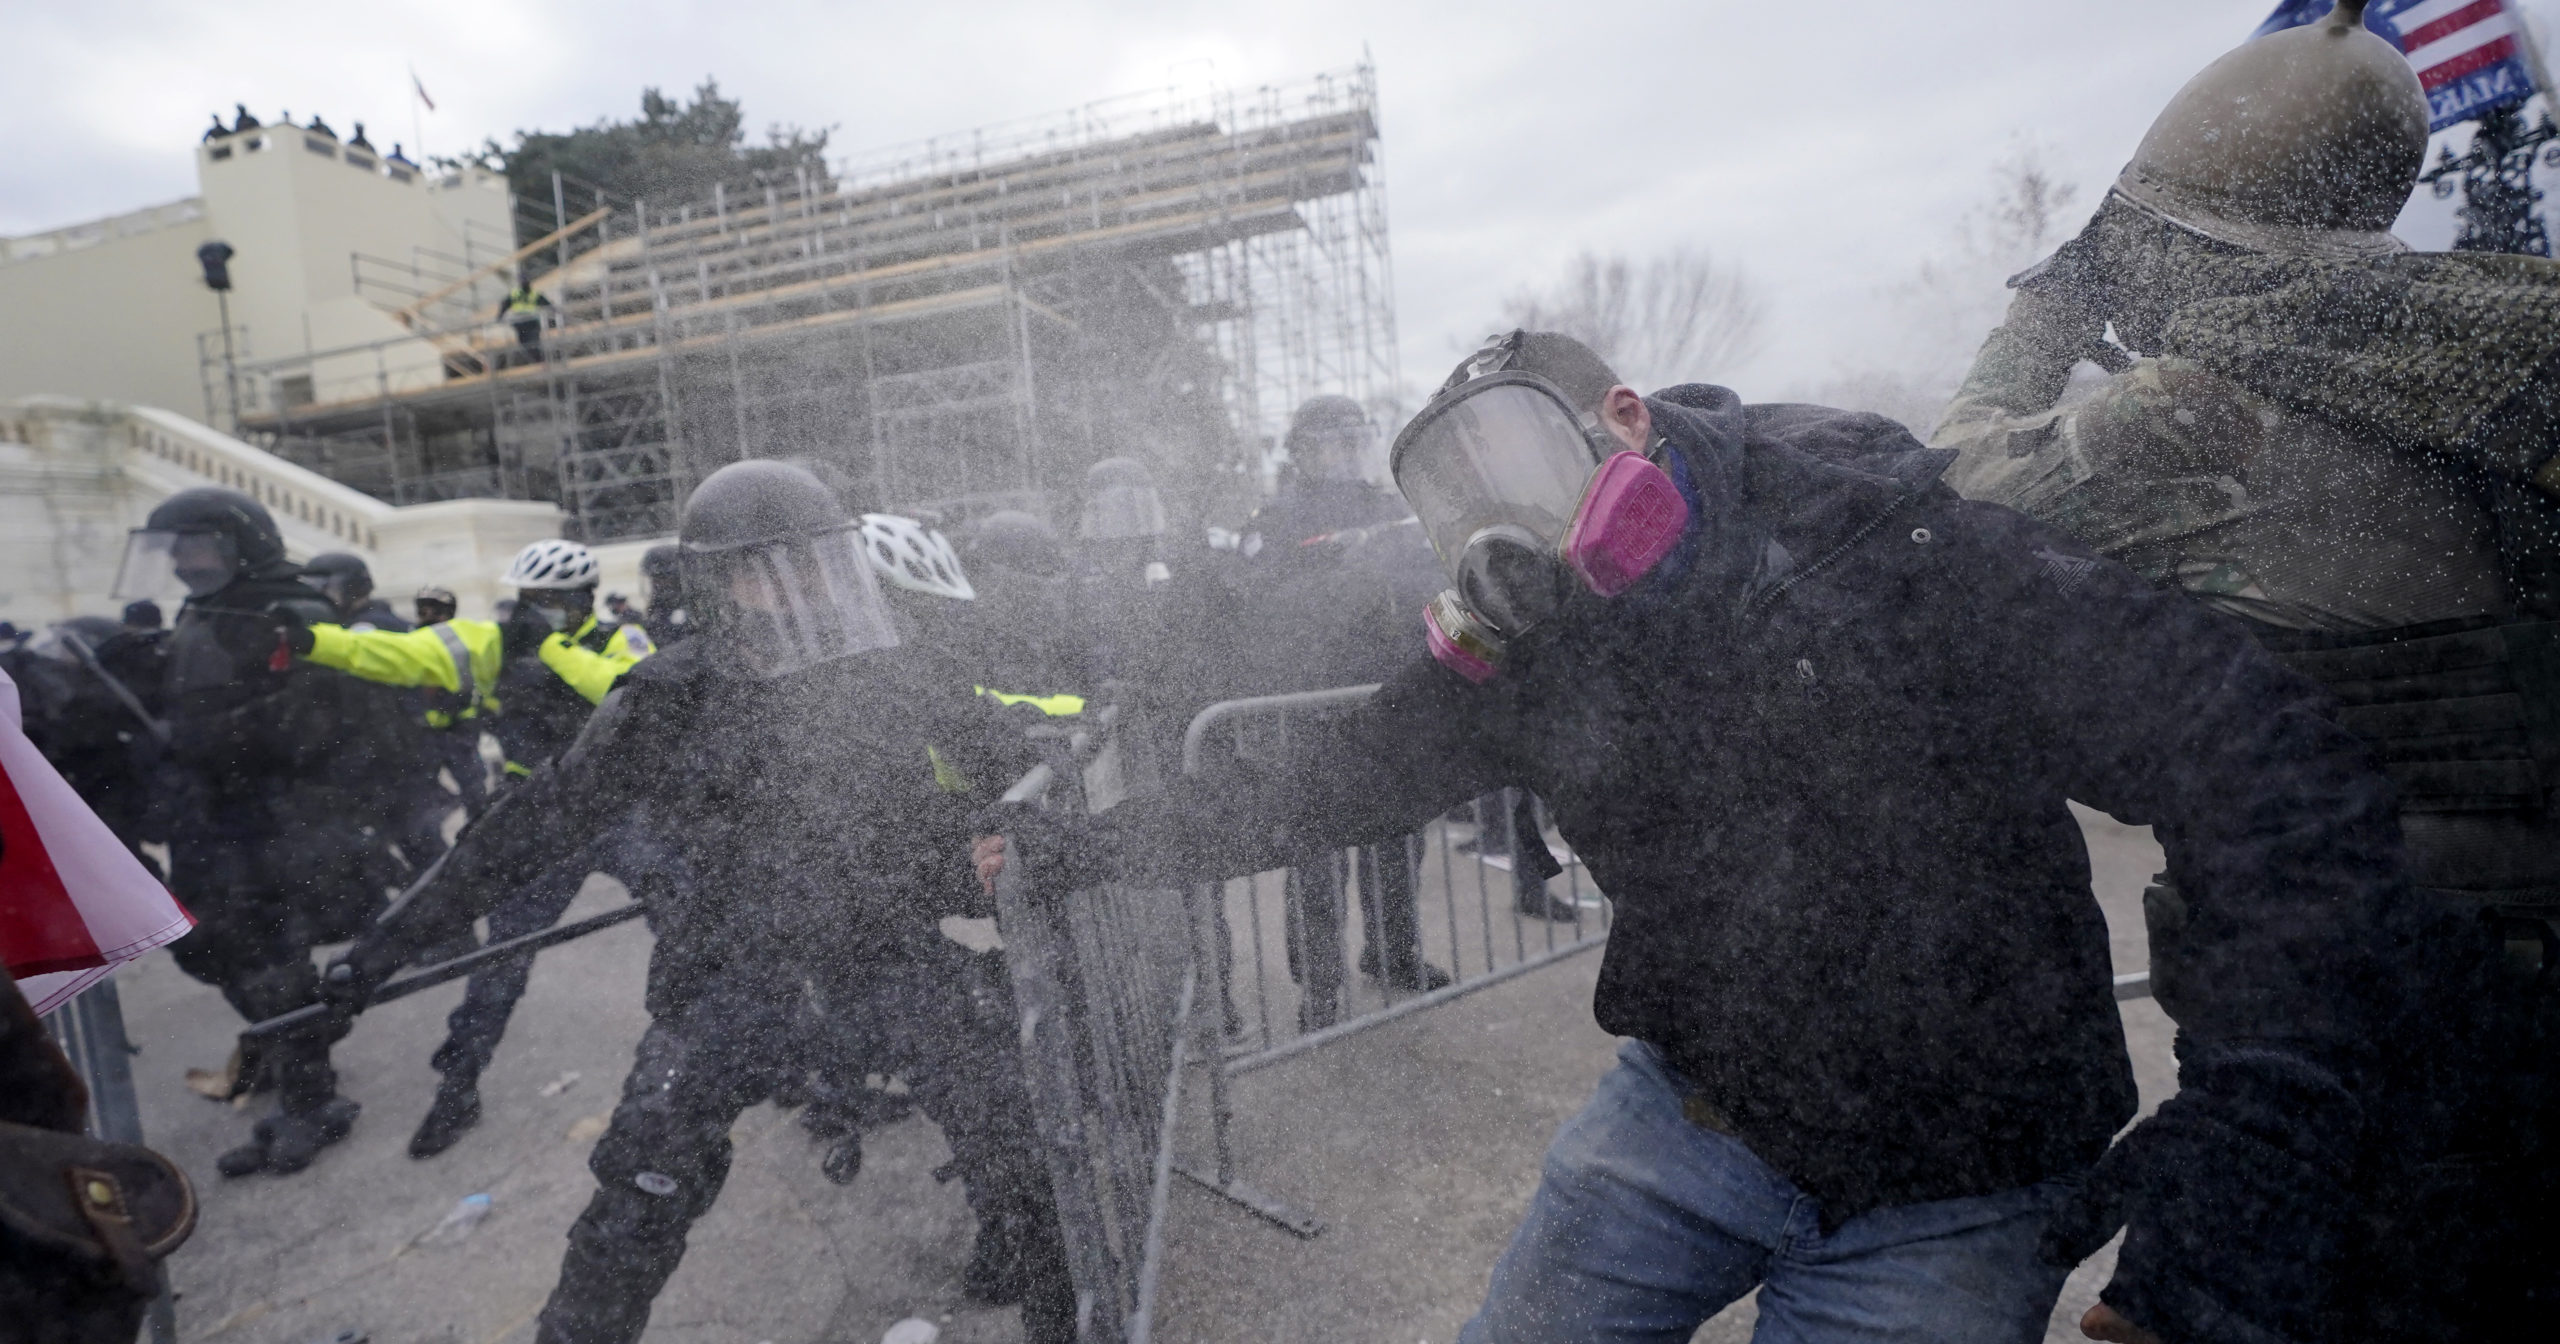 Trump supporters try to break through a police barrier on Jan. 6, 2021, at the Capitol in Washington.